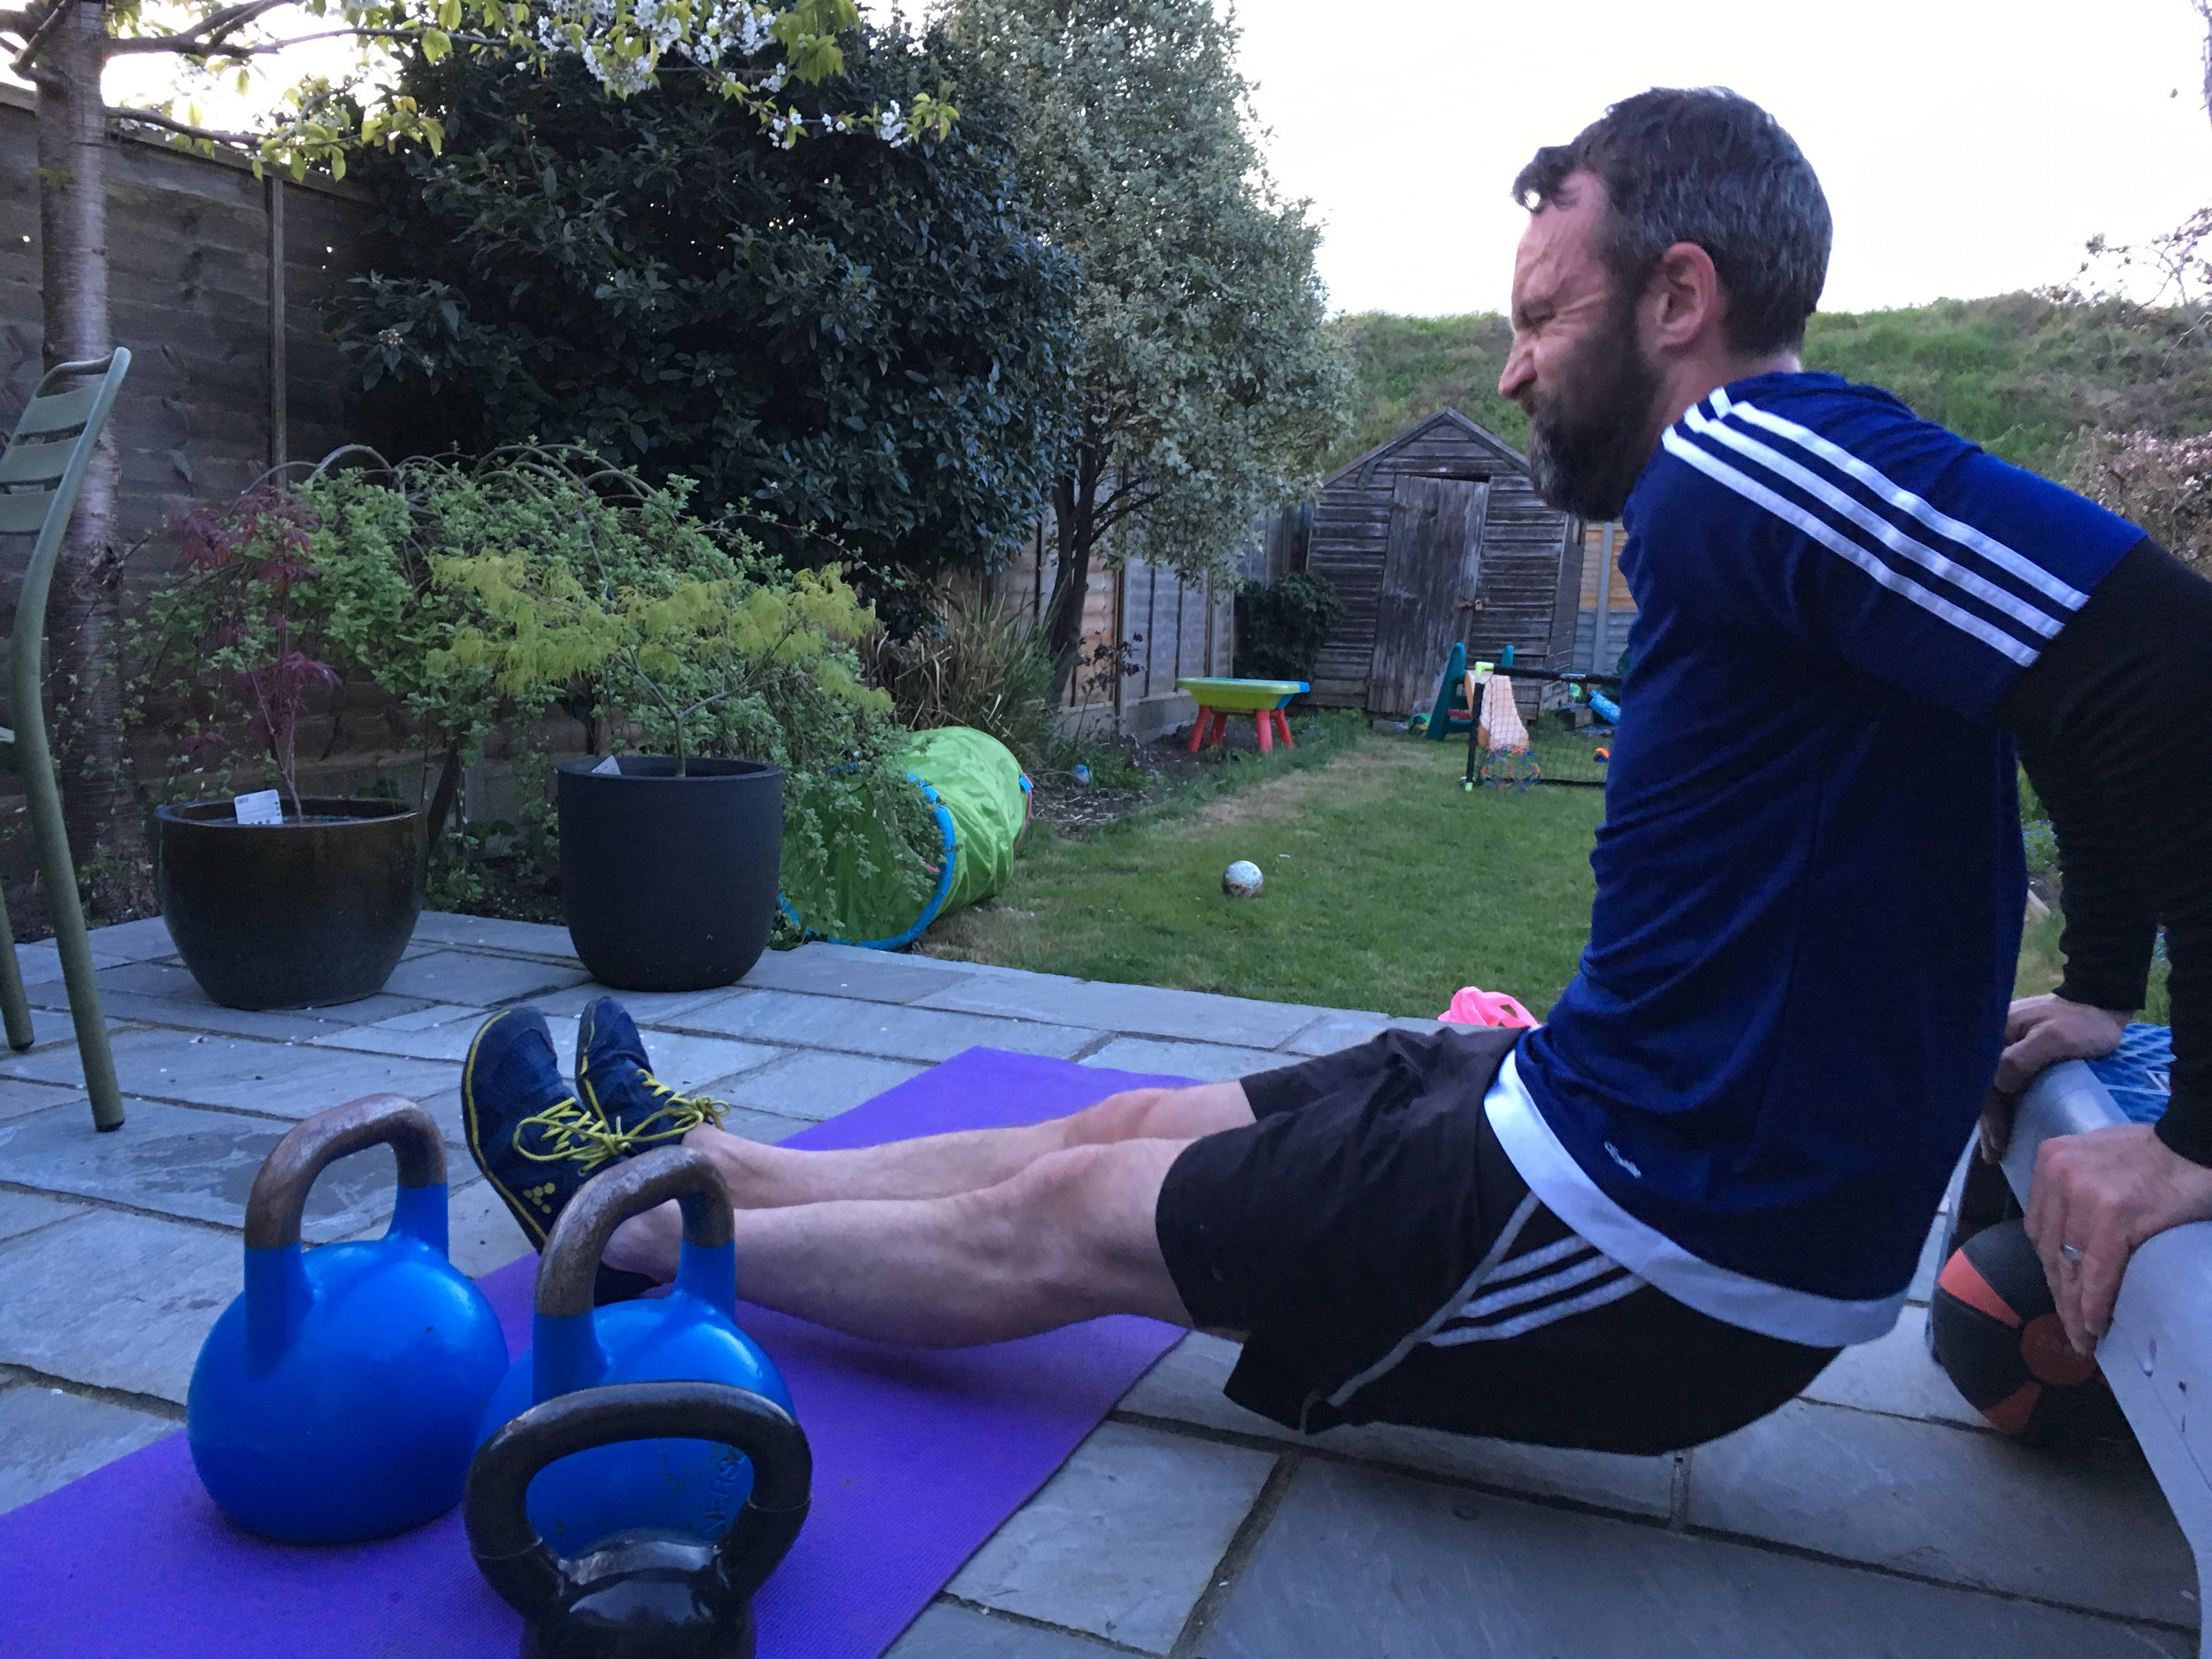 Outdoor Personal Training